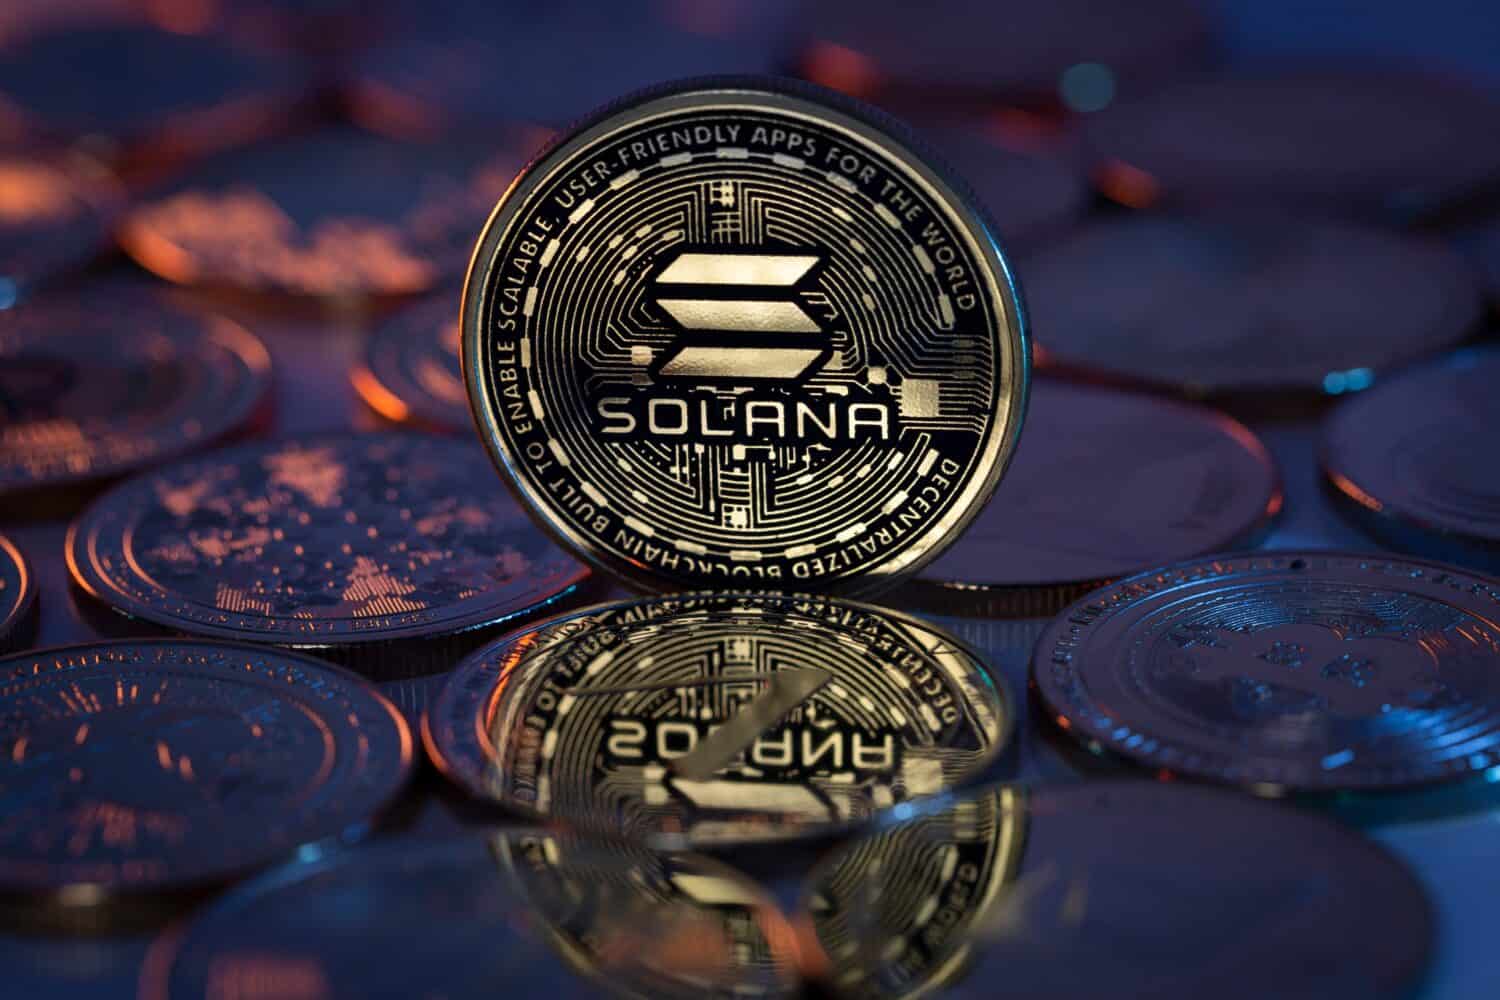 Solana SOL Cryptocurrency Physical Coin placed on crypto altcoins and lit with orange and blue lights in the dark Backgrond. Macro shot. Selective focus.